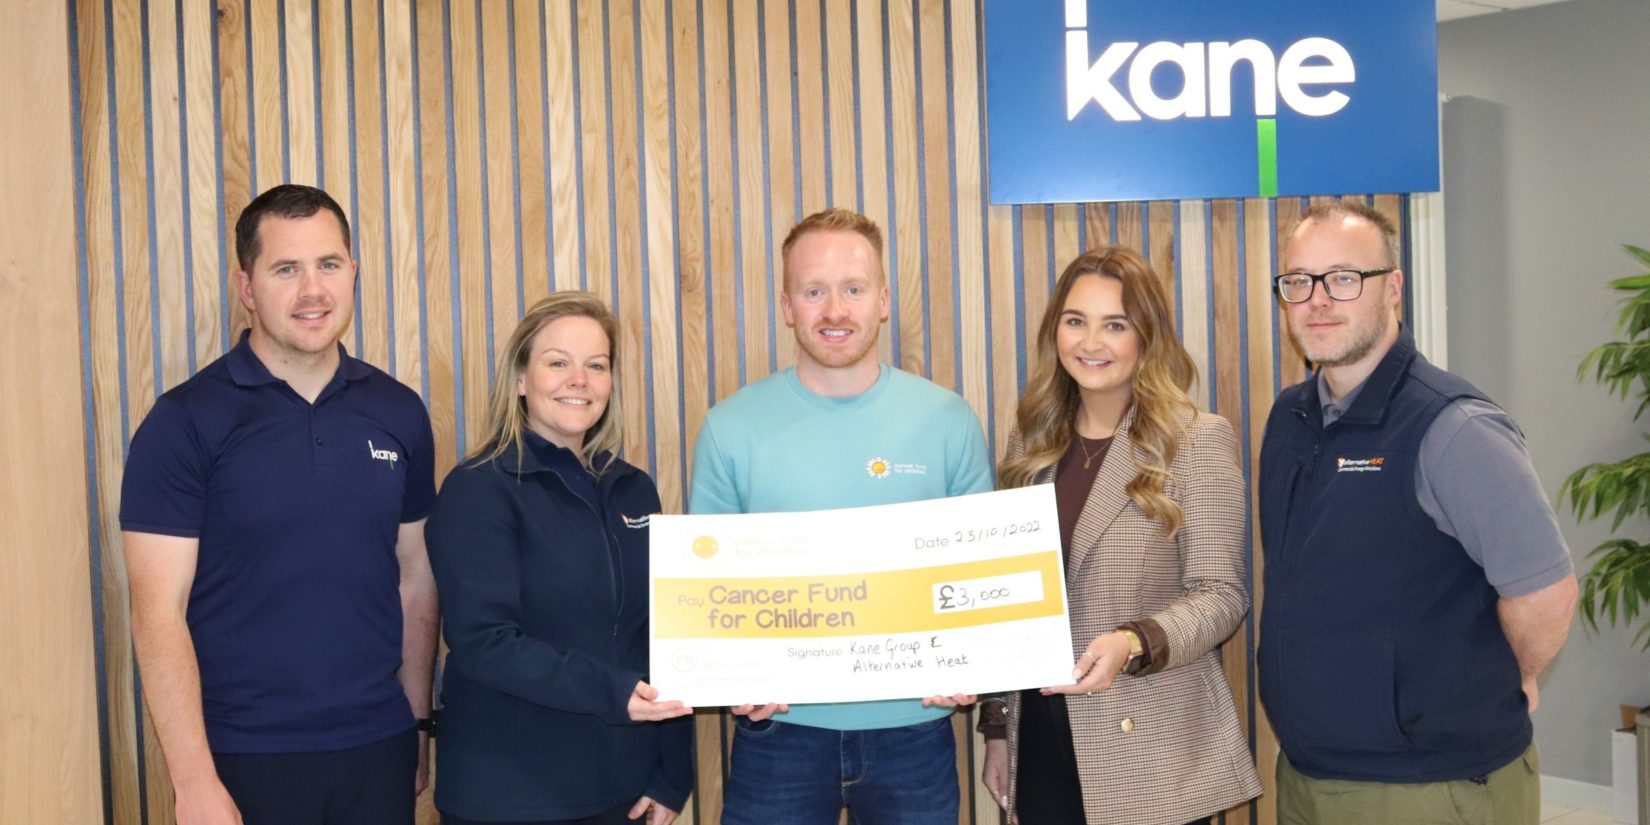 Pictured above presenting a cheque to Cancer Fund for Children (L-R): Noel McPolin (Kane Group), Christine Mannion (Alternative Heat), Cormac McMullan (Cancer Fund for Children), Chloe Stafford (Kane Group) and Joe McAuley (Alternative Heat)